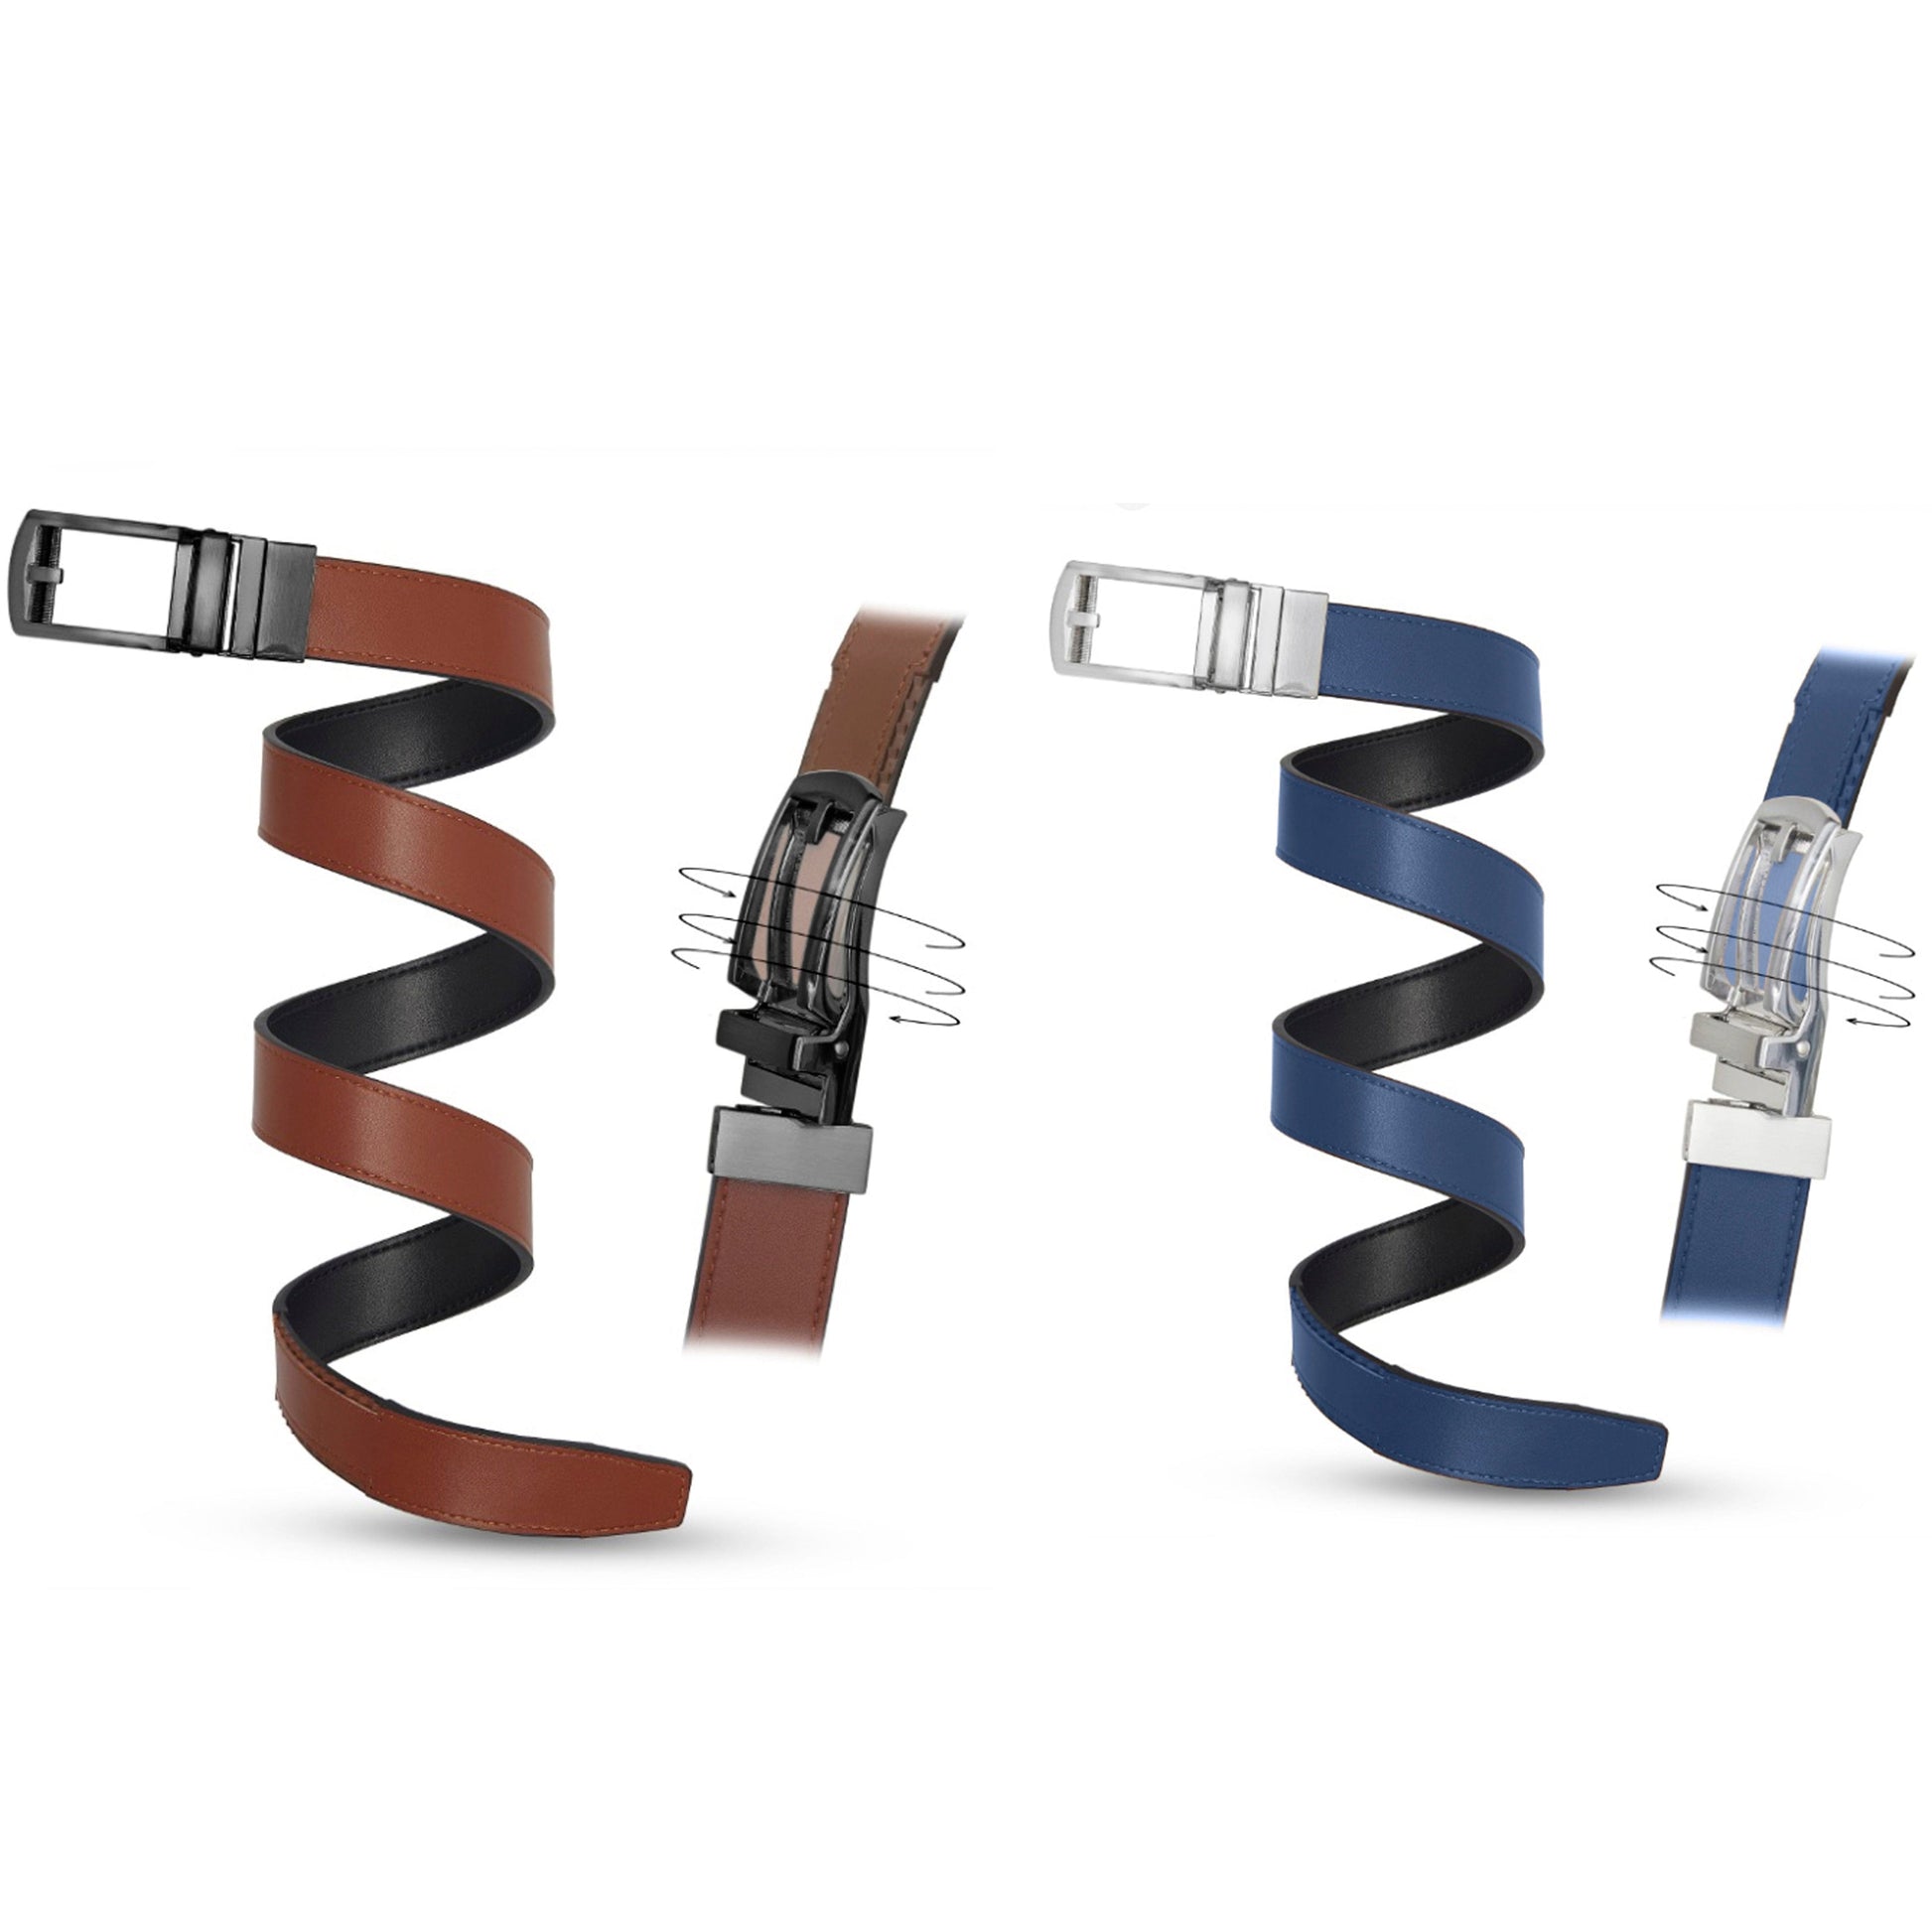 Black/Grey Strap With Black Buckle and Black/Navy Strap With Silver Buckle Ratchet Belts